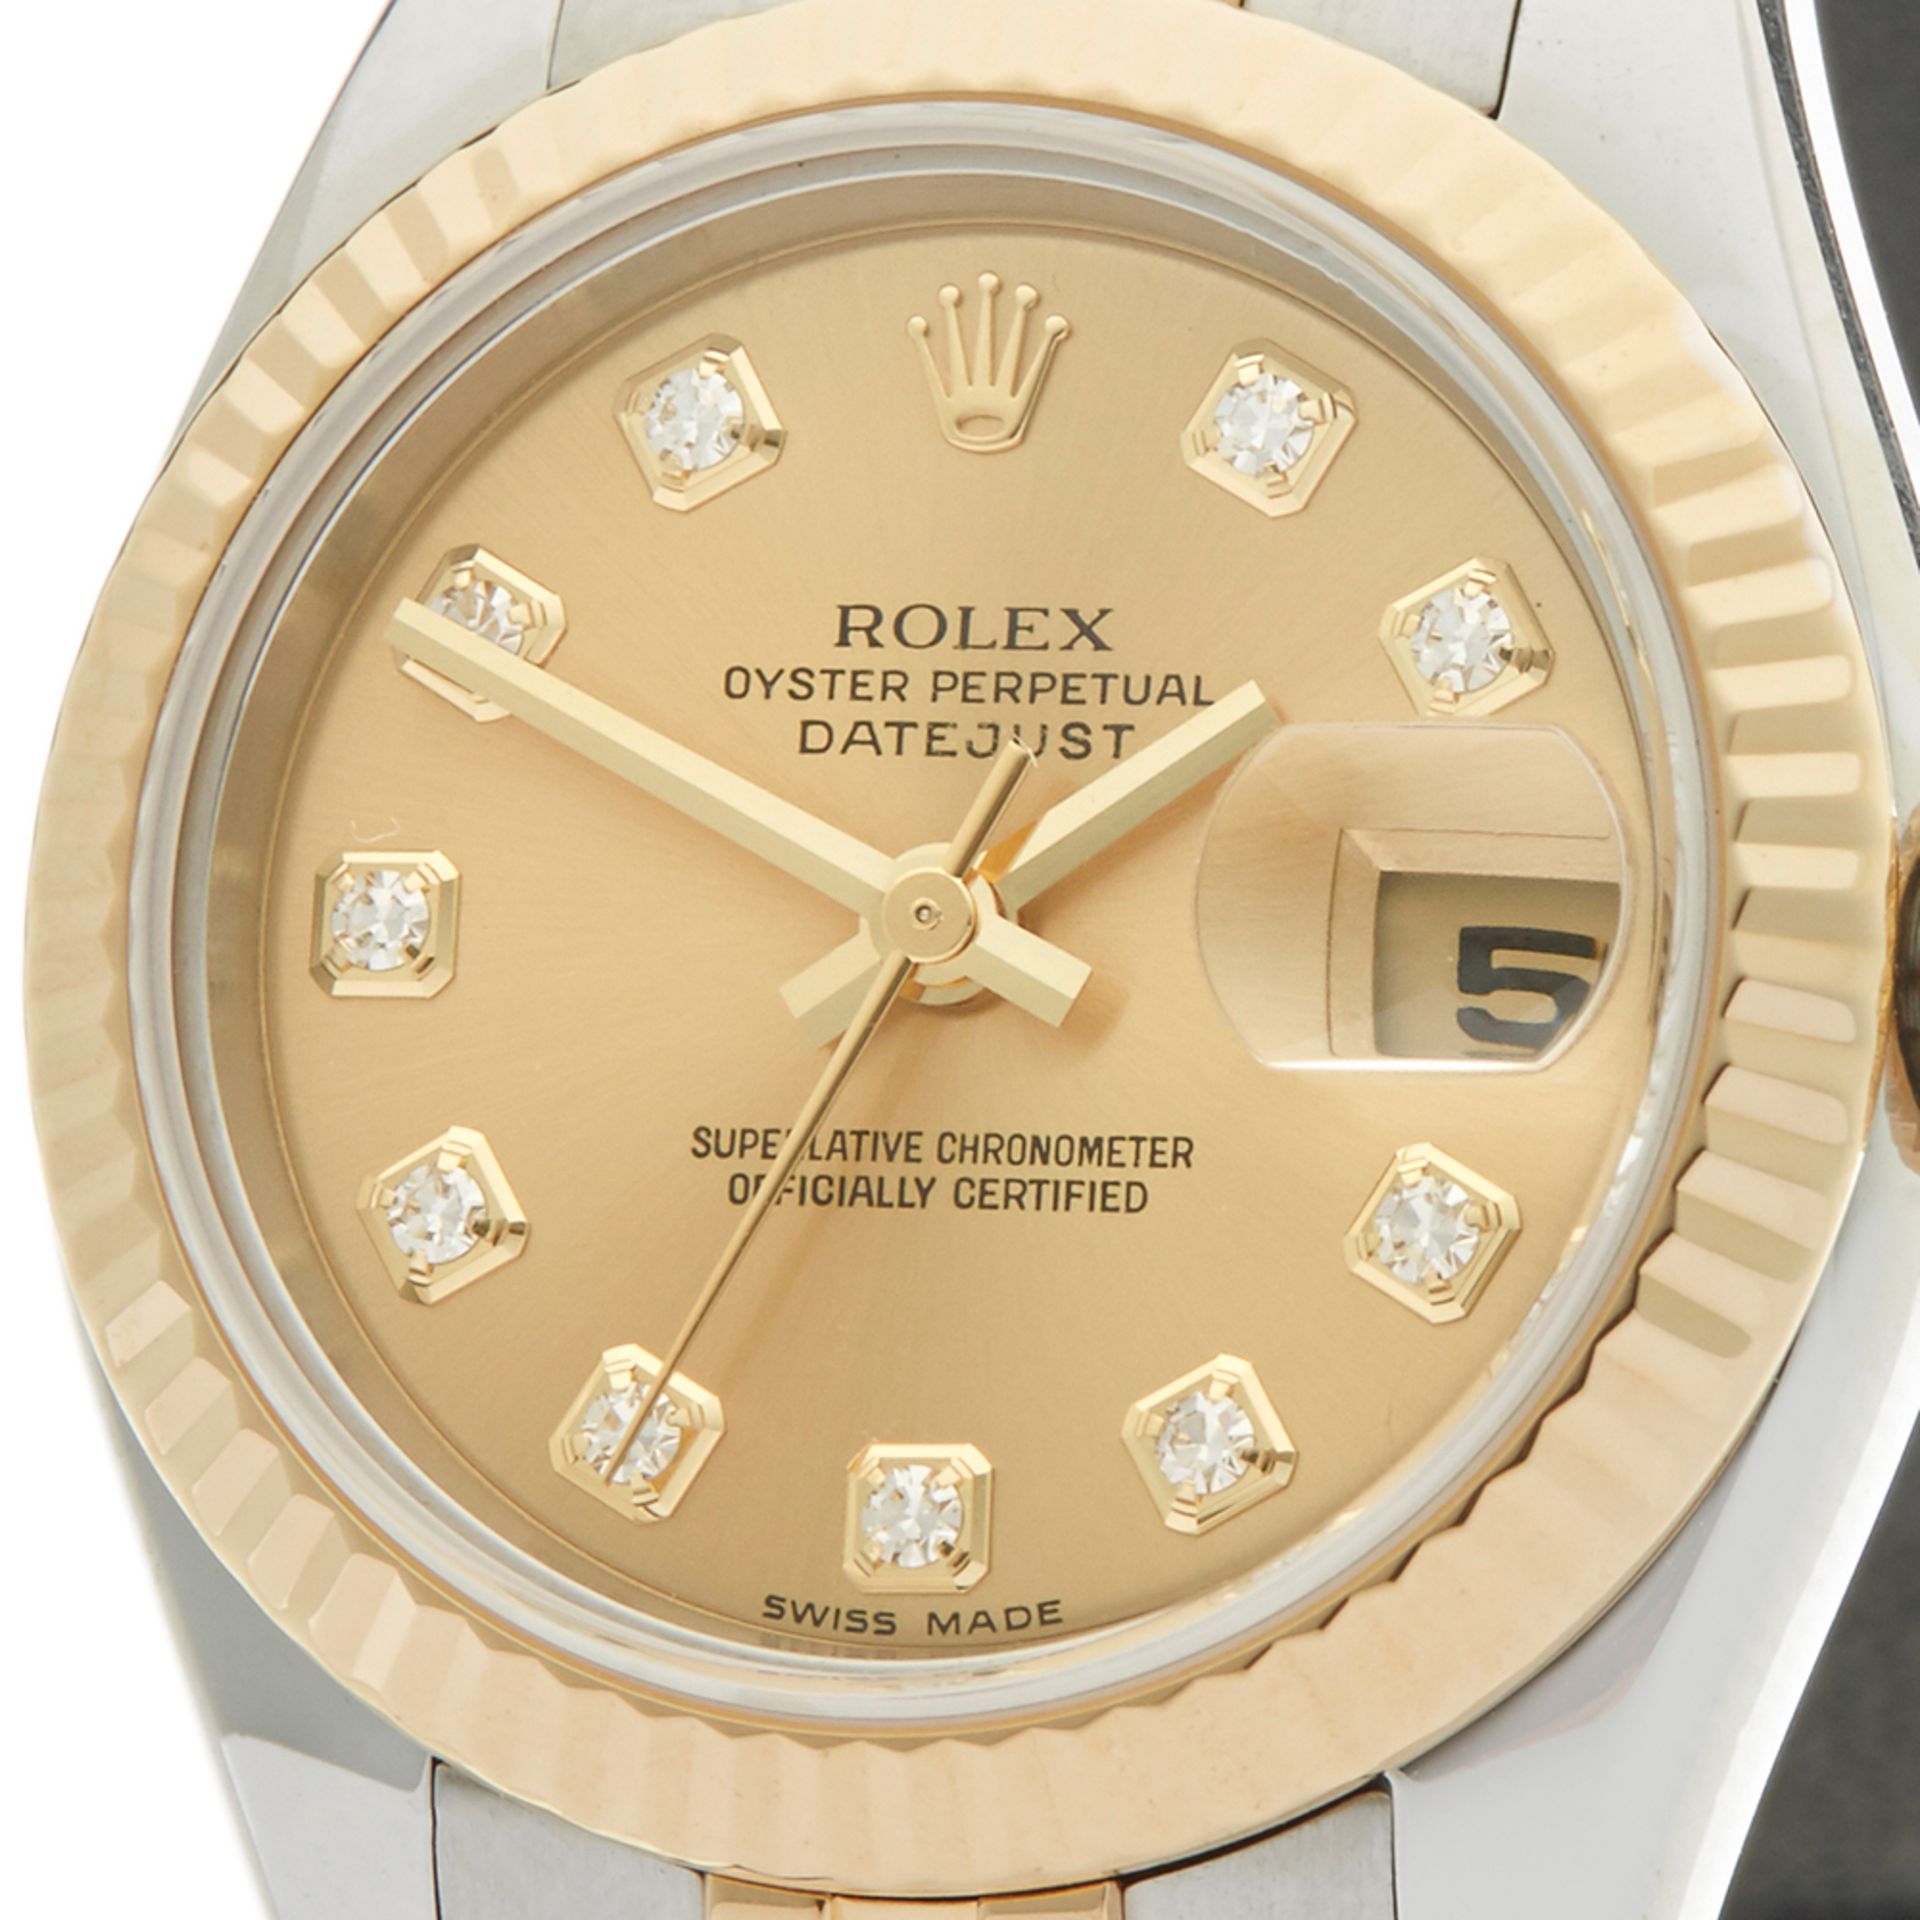 2005 Rolex DateJust 26 Diamond 18k Stainless Steel & Yellow Gold - 179173 - Image 6 of 7